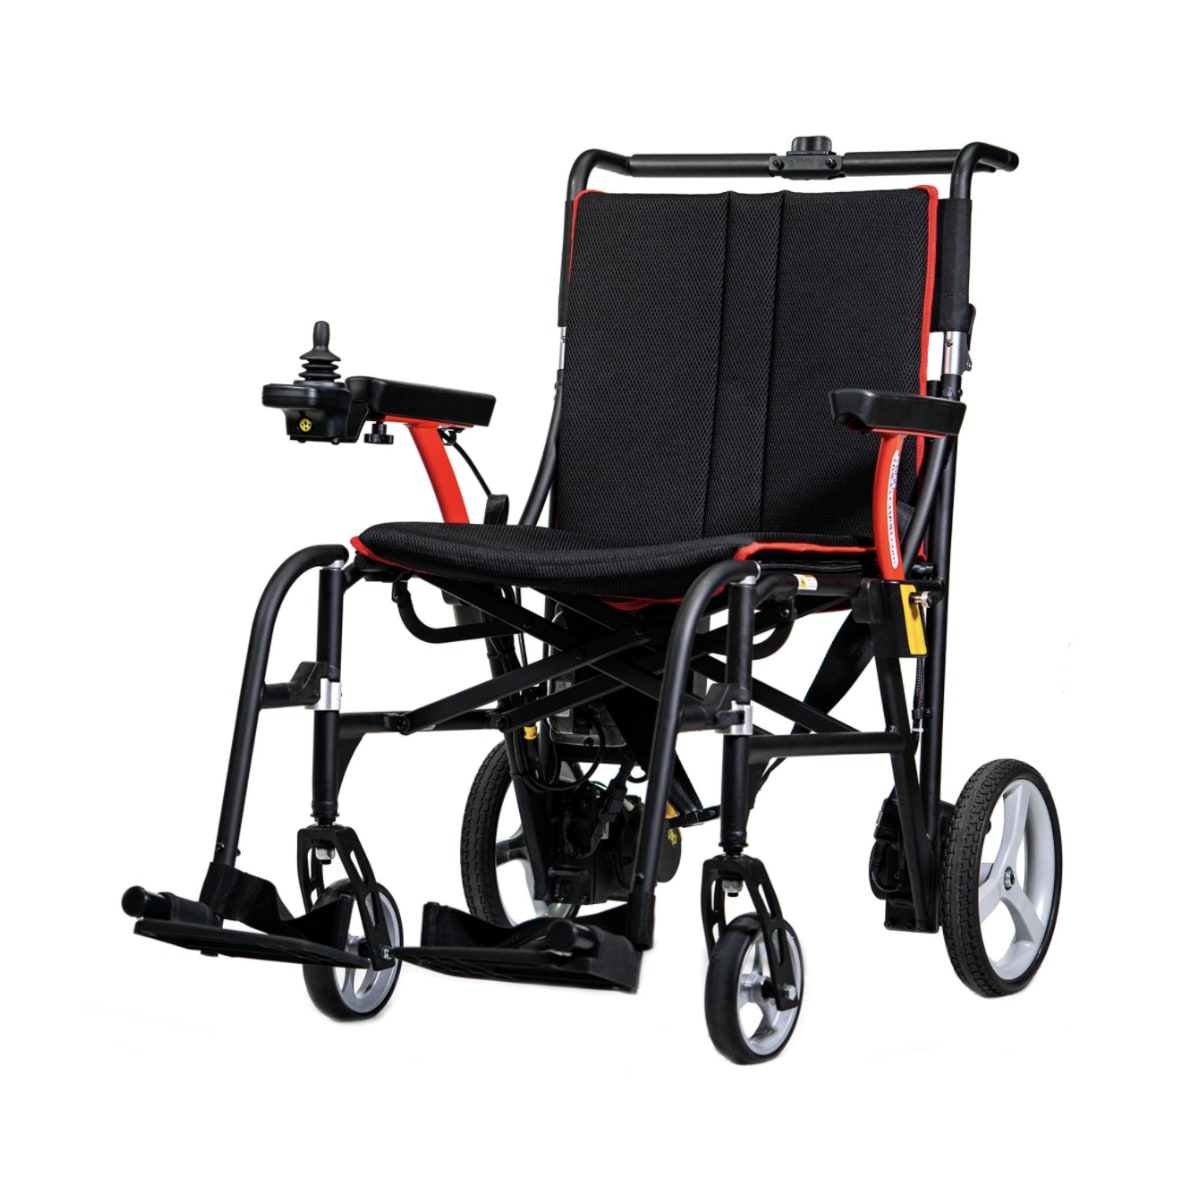 Feather brand power wheelchair, standard look in black with orange highlights